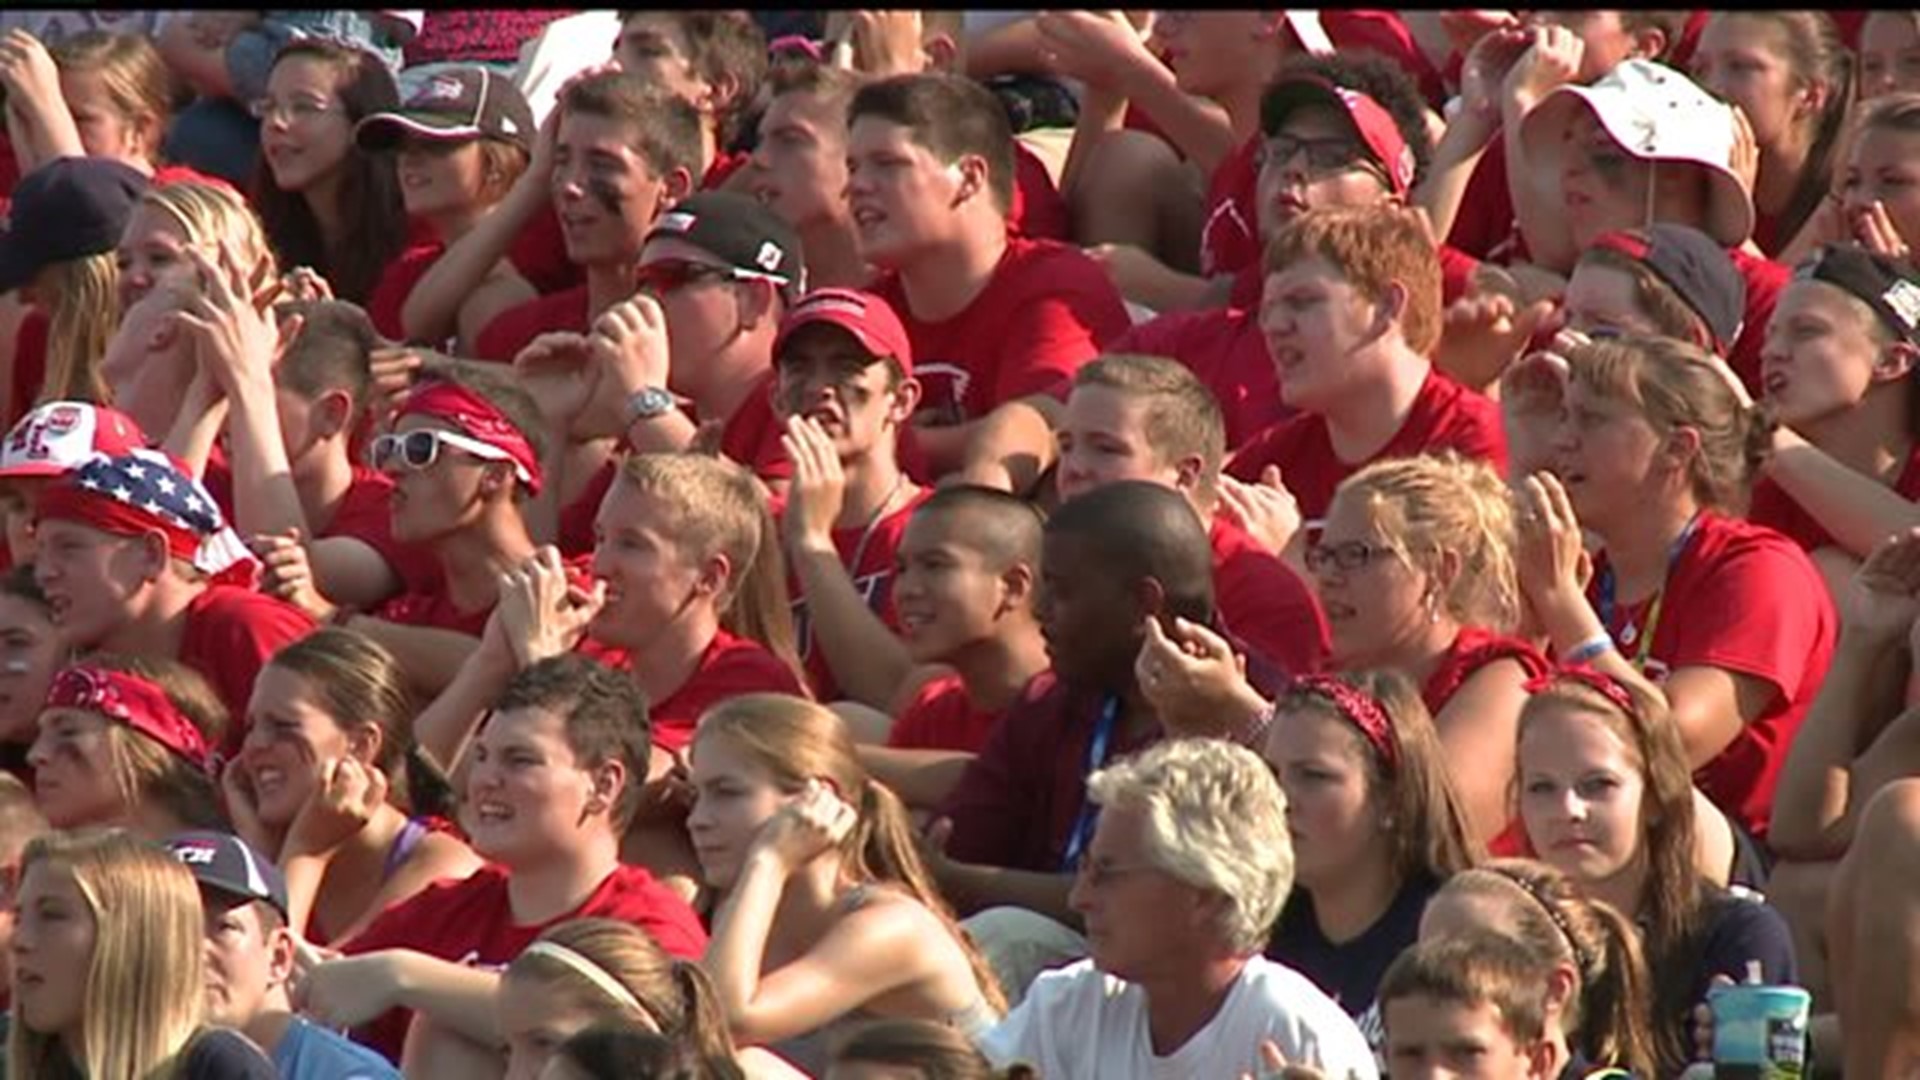 A sea of red cheers on Red Land at the Little League World Series game